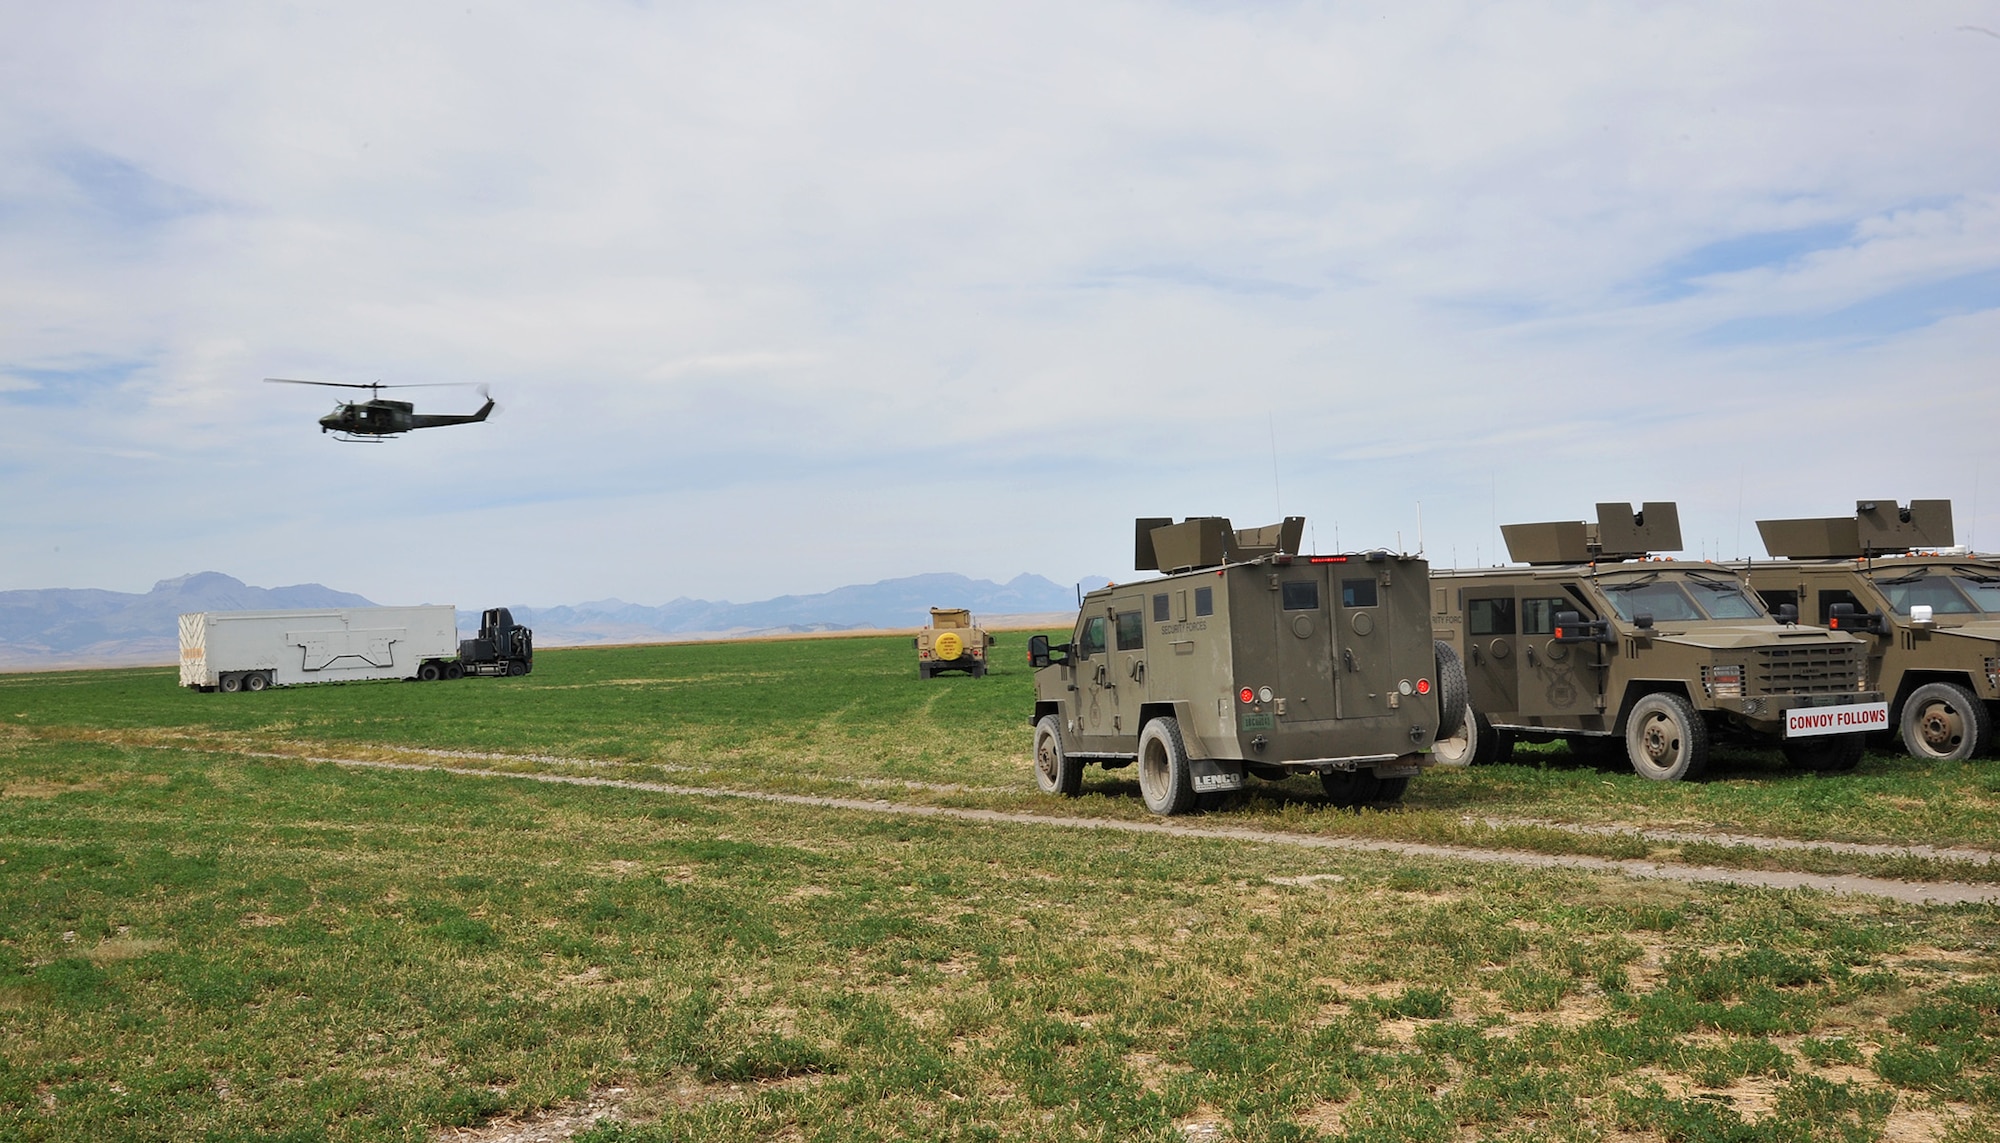 A UH-1N Iroquois helicopter from the 40th Helicopter Squadron circles over a payload transporter and security forces vehicles assigned to the 341st Missile Wing prior to the start of the Local Integrated Response Plan exercise Aug. 16, 2017, near Choteau, Mont.